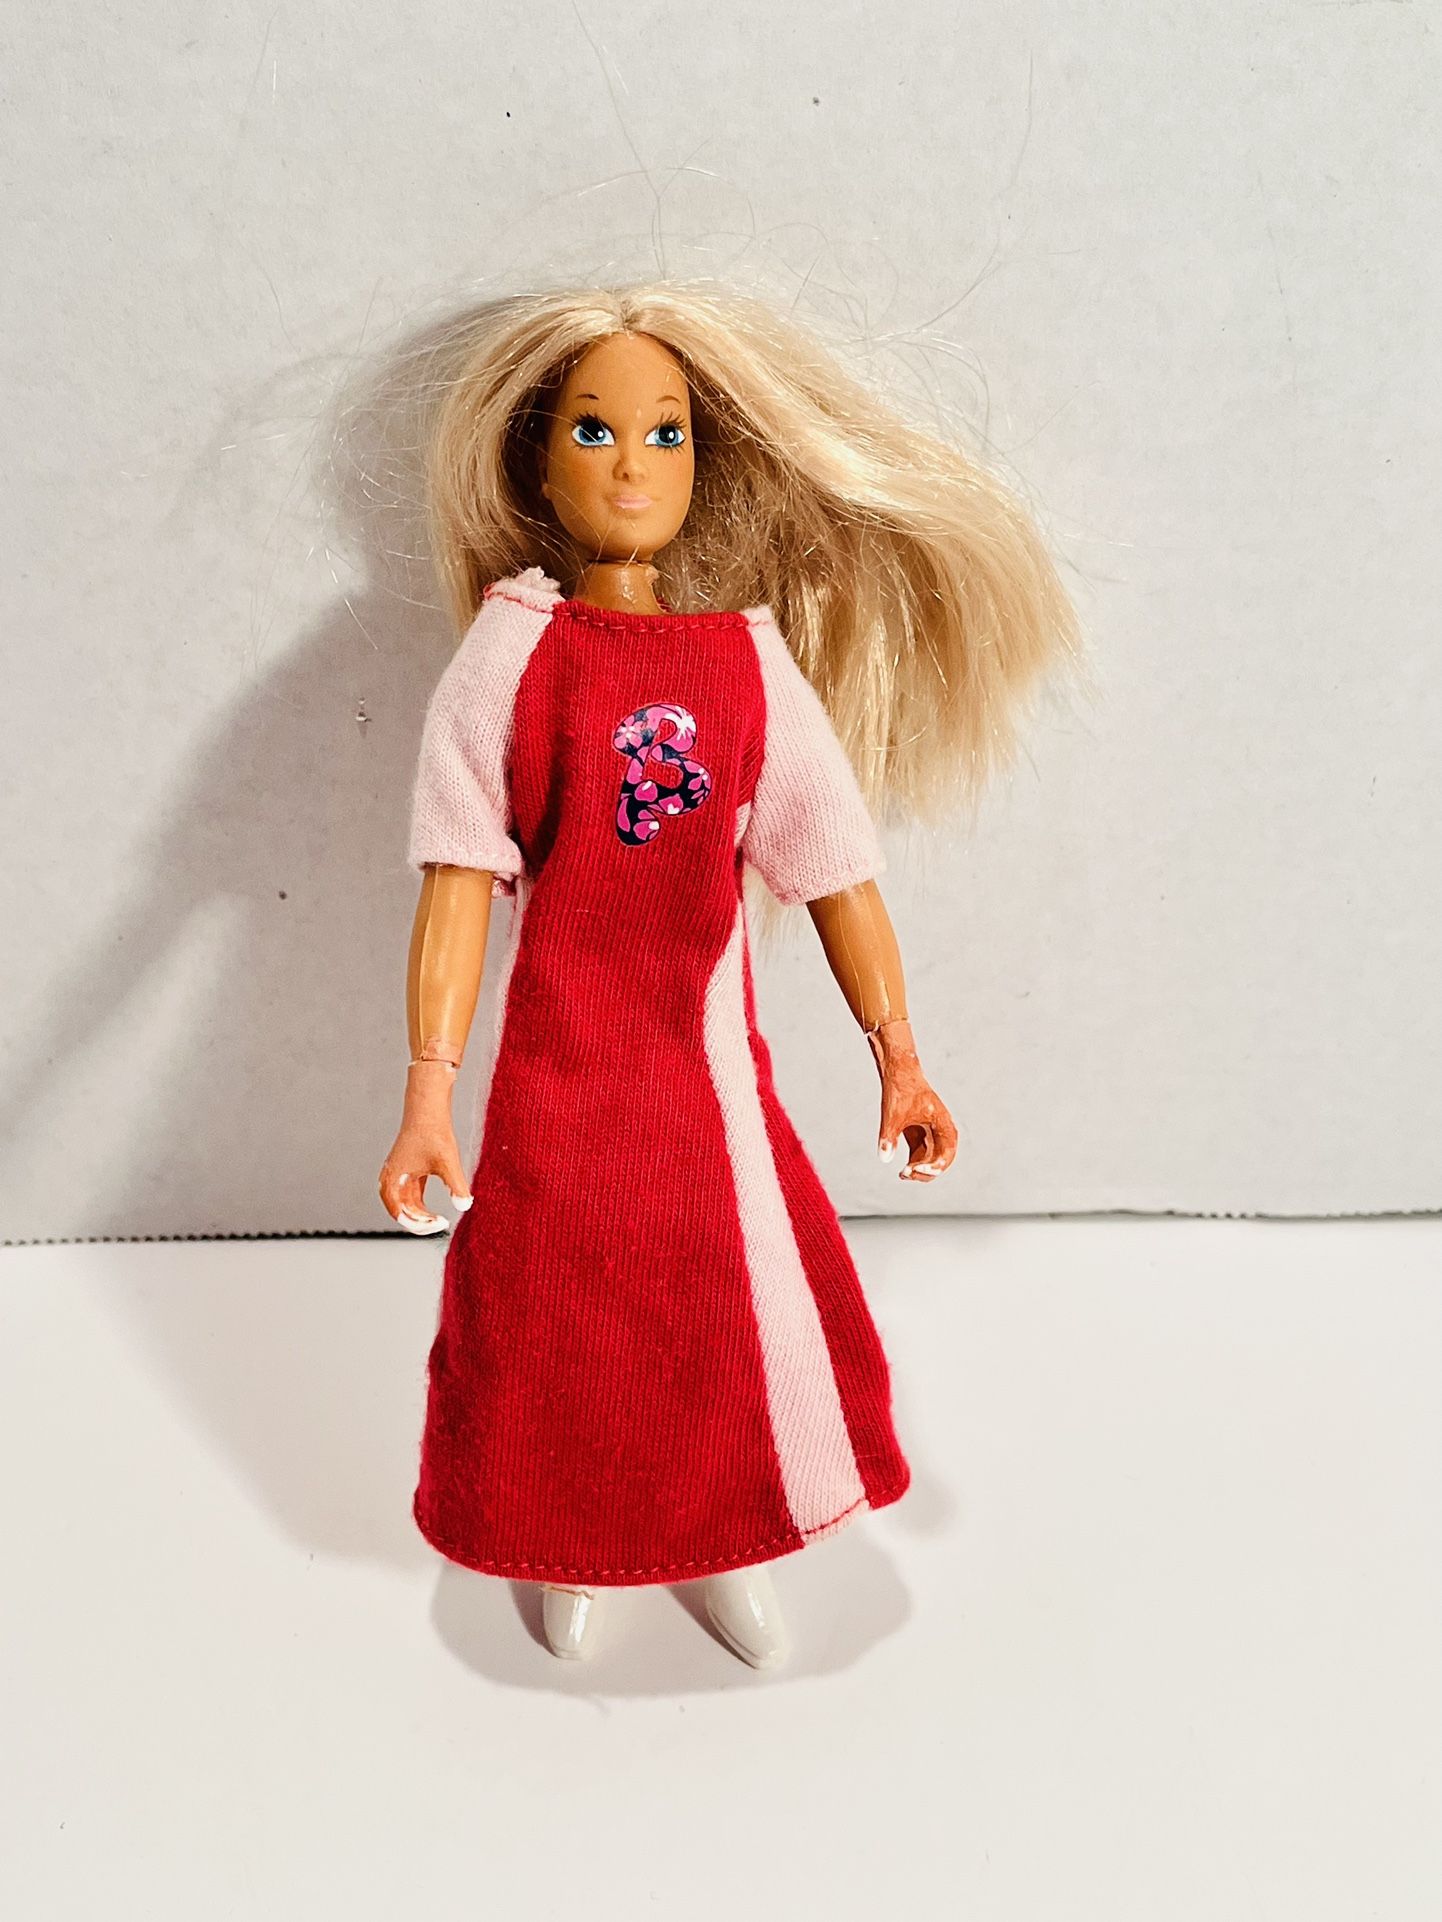 DERRY DARING DOLL ONLY RACING ADVENTURE SET EVEL KNIEVEL STUNT GIRL IDEAL 1974